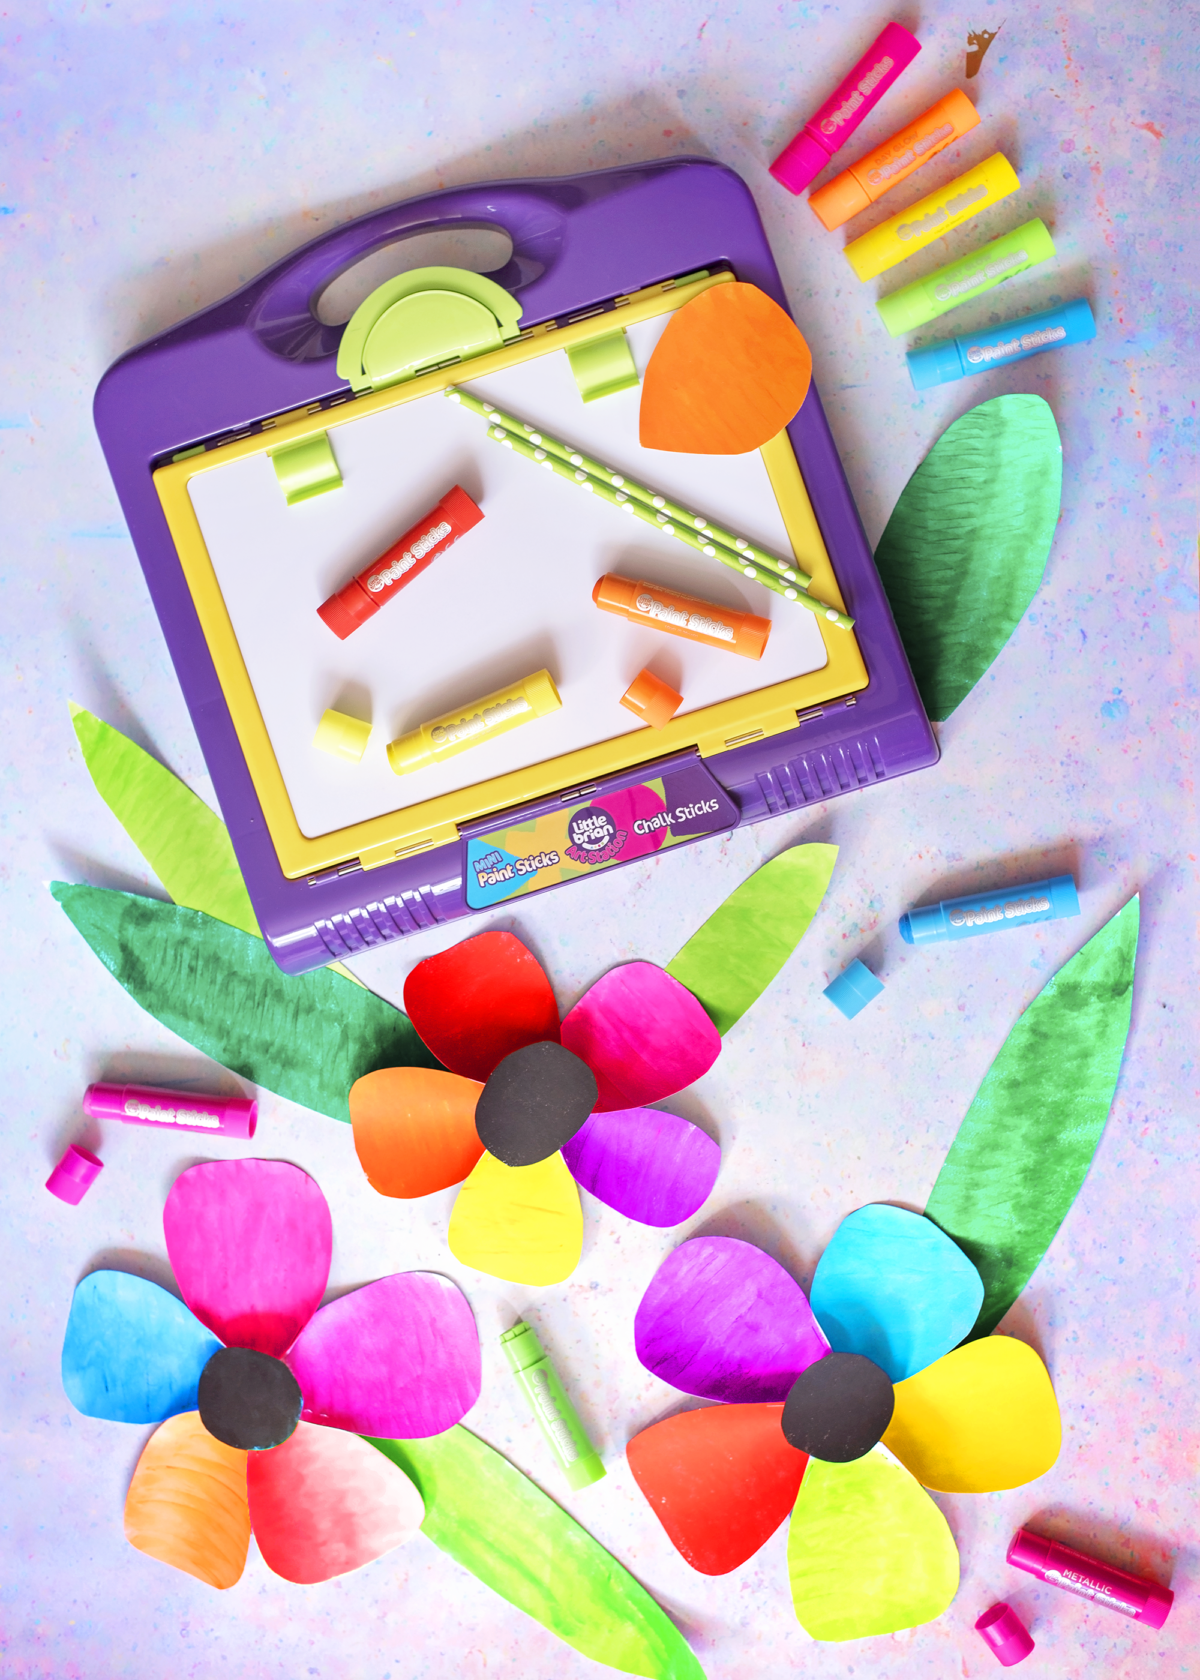 Little Brian Paint Sticks and Art Station, Large Rainbow Paper Flowers. All simple and mess free painting crafts for Spring and Mother's Day.